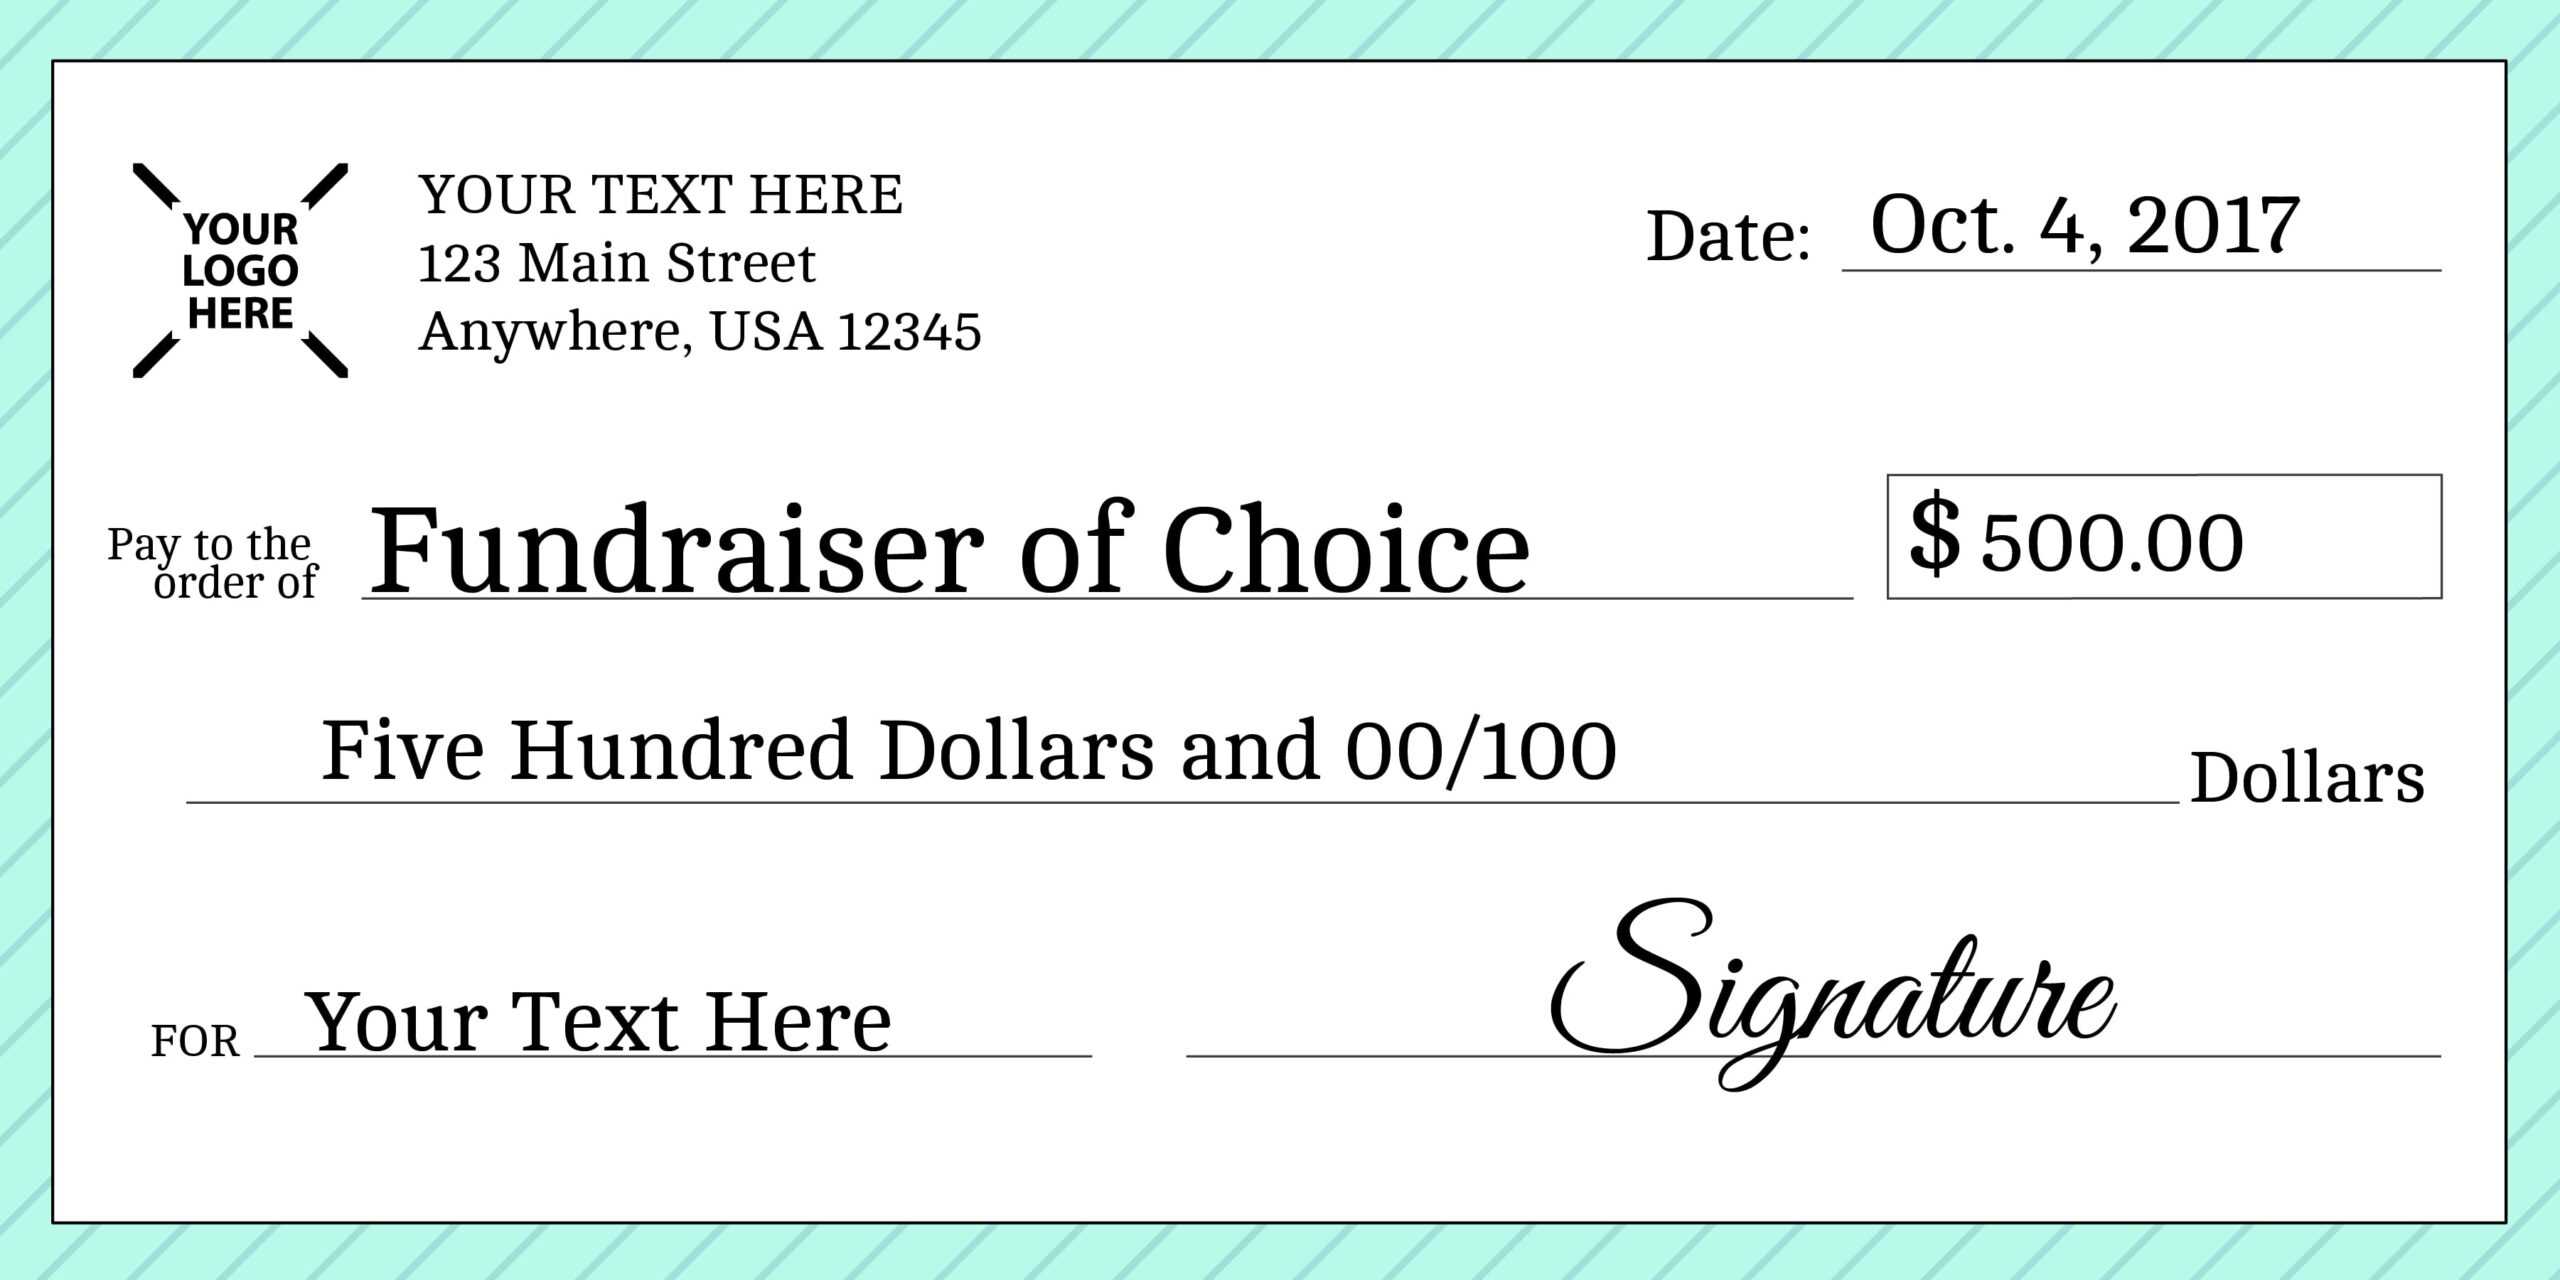 012 Printable Checks Of How Counter Work From Your Branch Or Pertaining To Large Blank Cheque Template